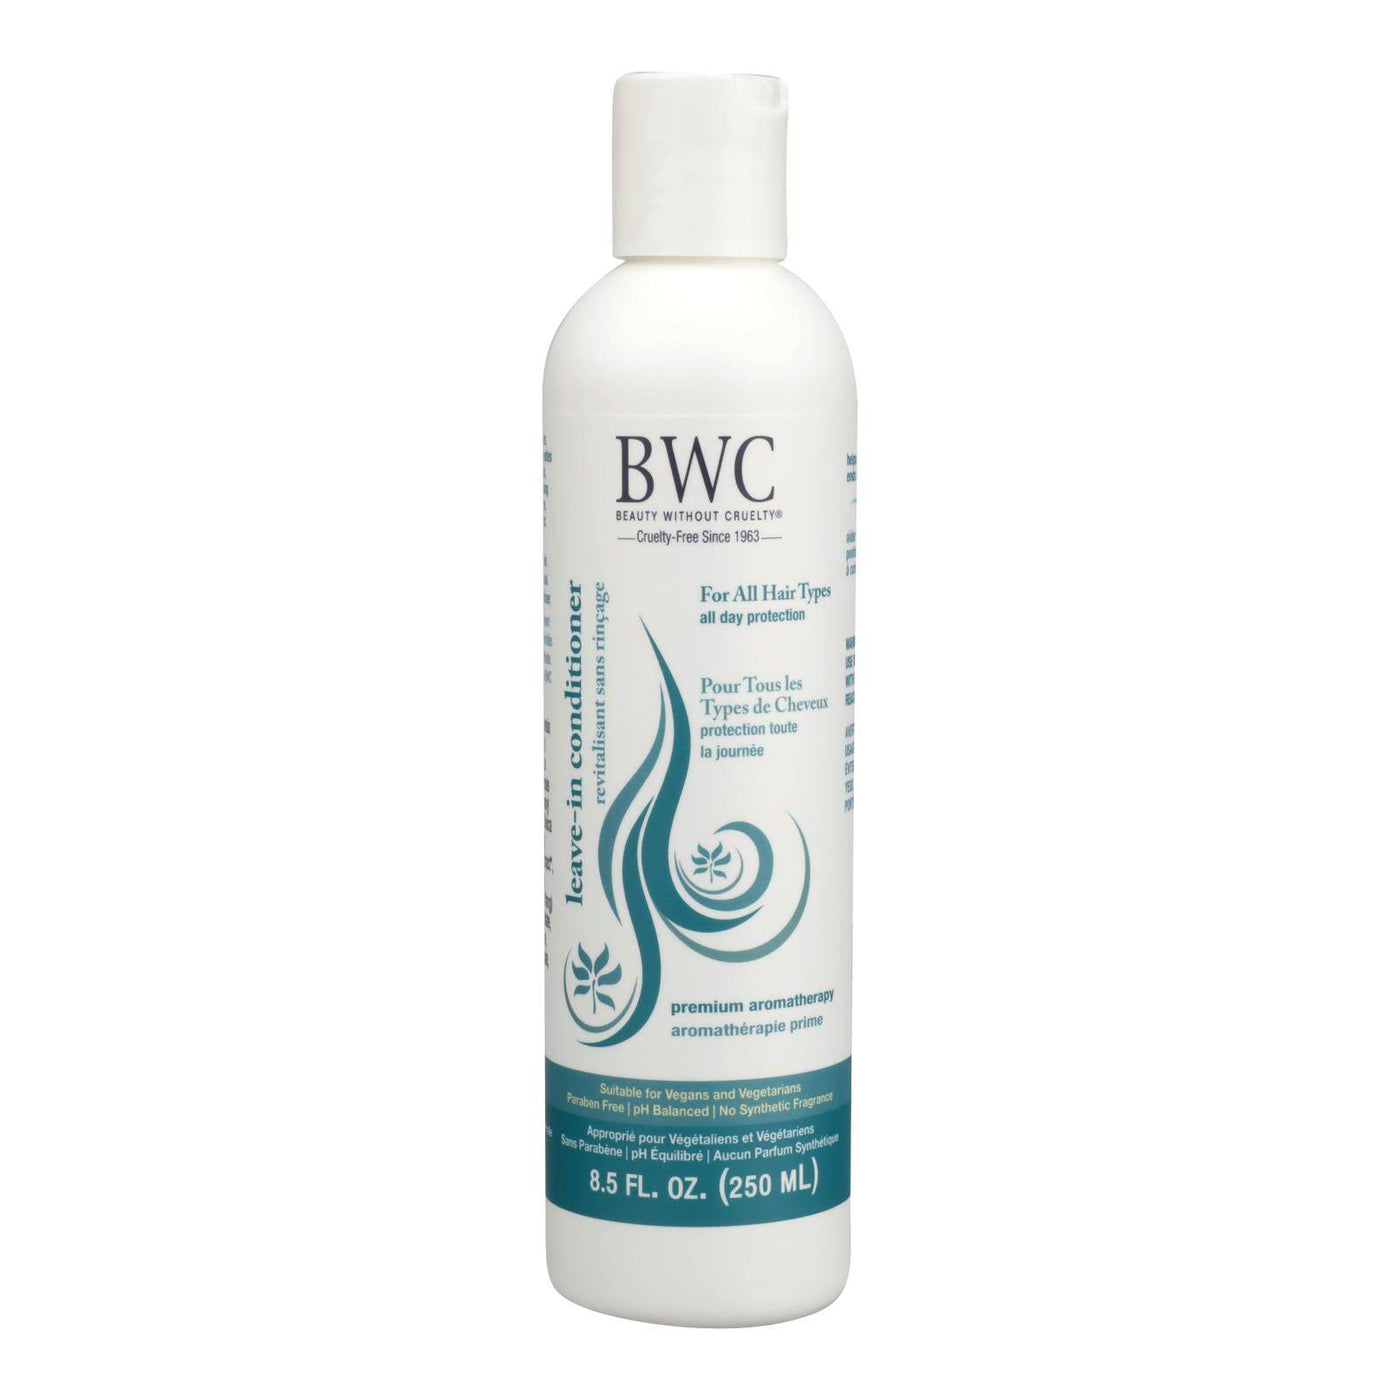 Beauty Without Cruelty Leave-in Conditioner Revitalize - 8.5 Fl Oz | OnlyNaturals.us